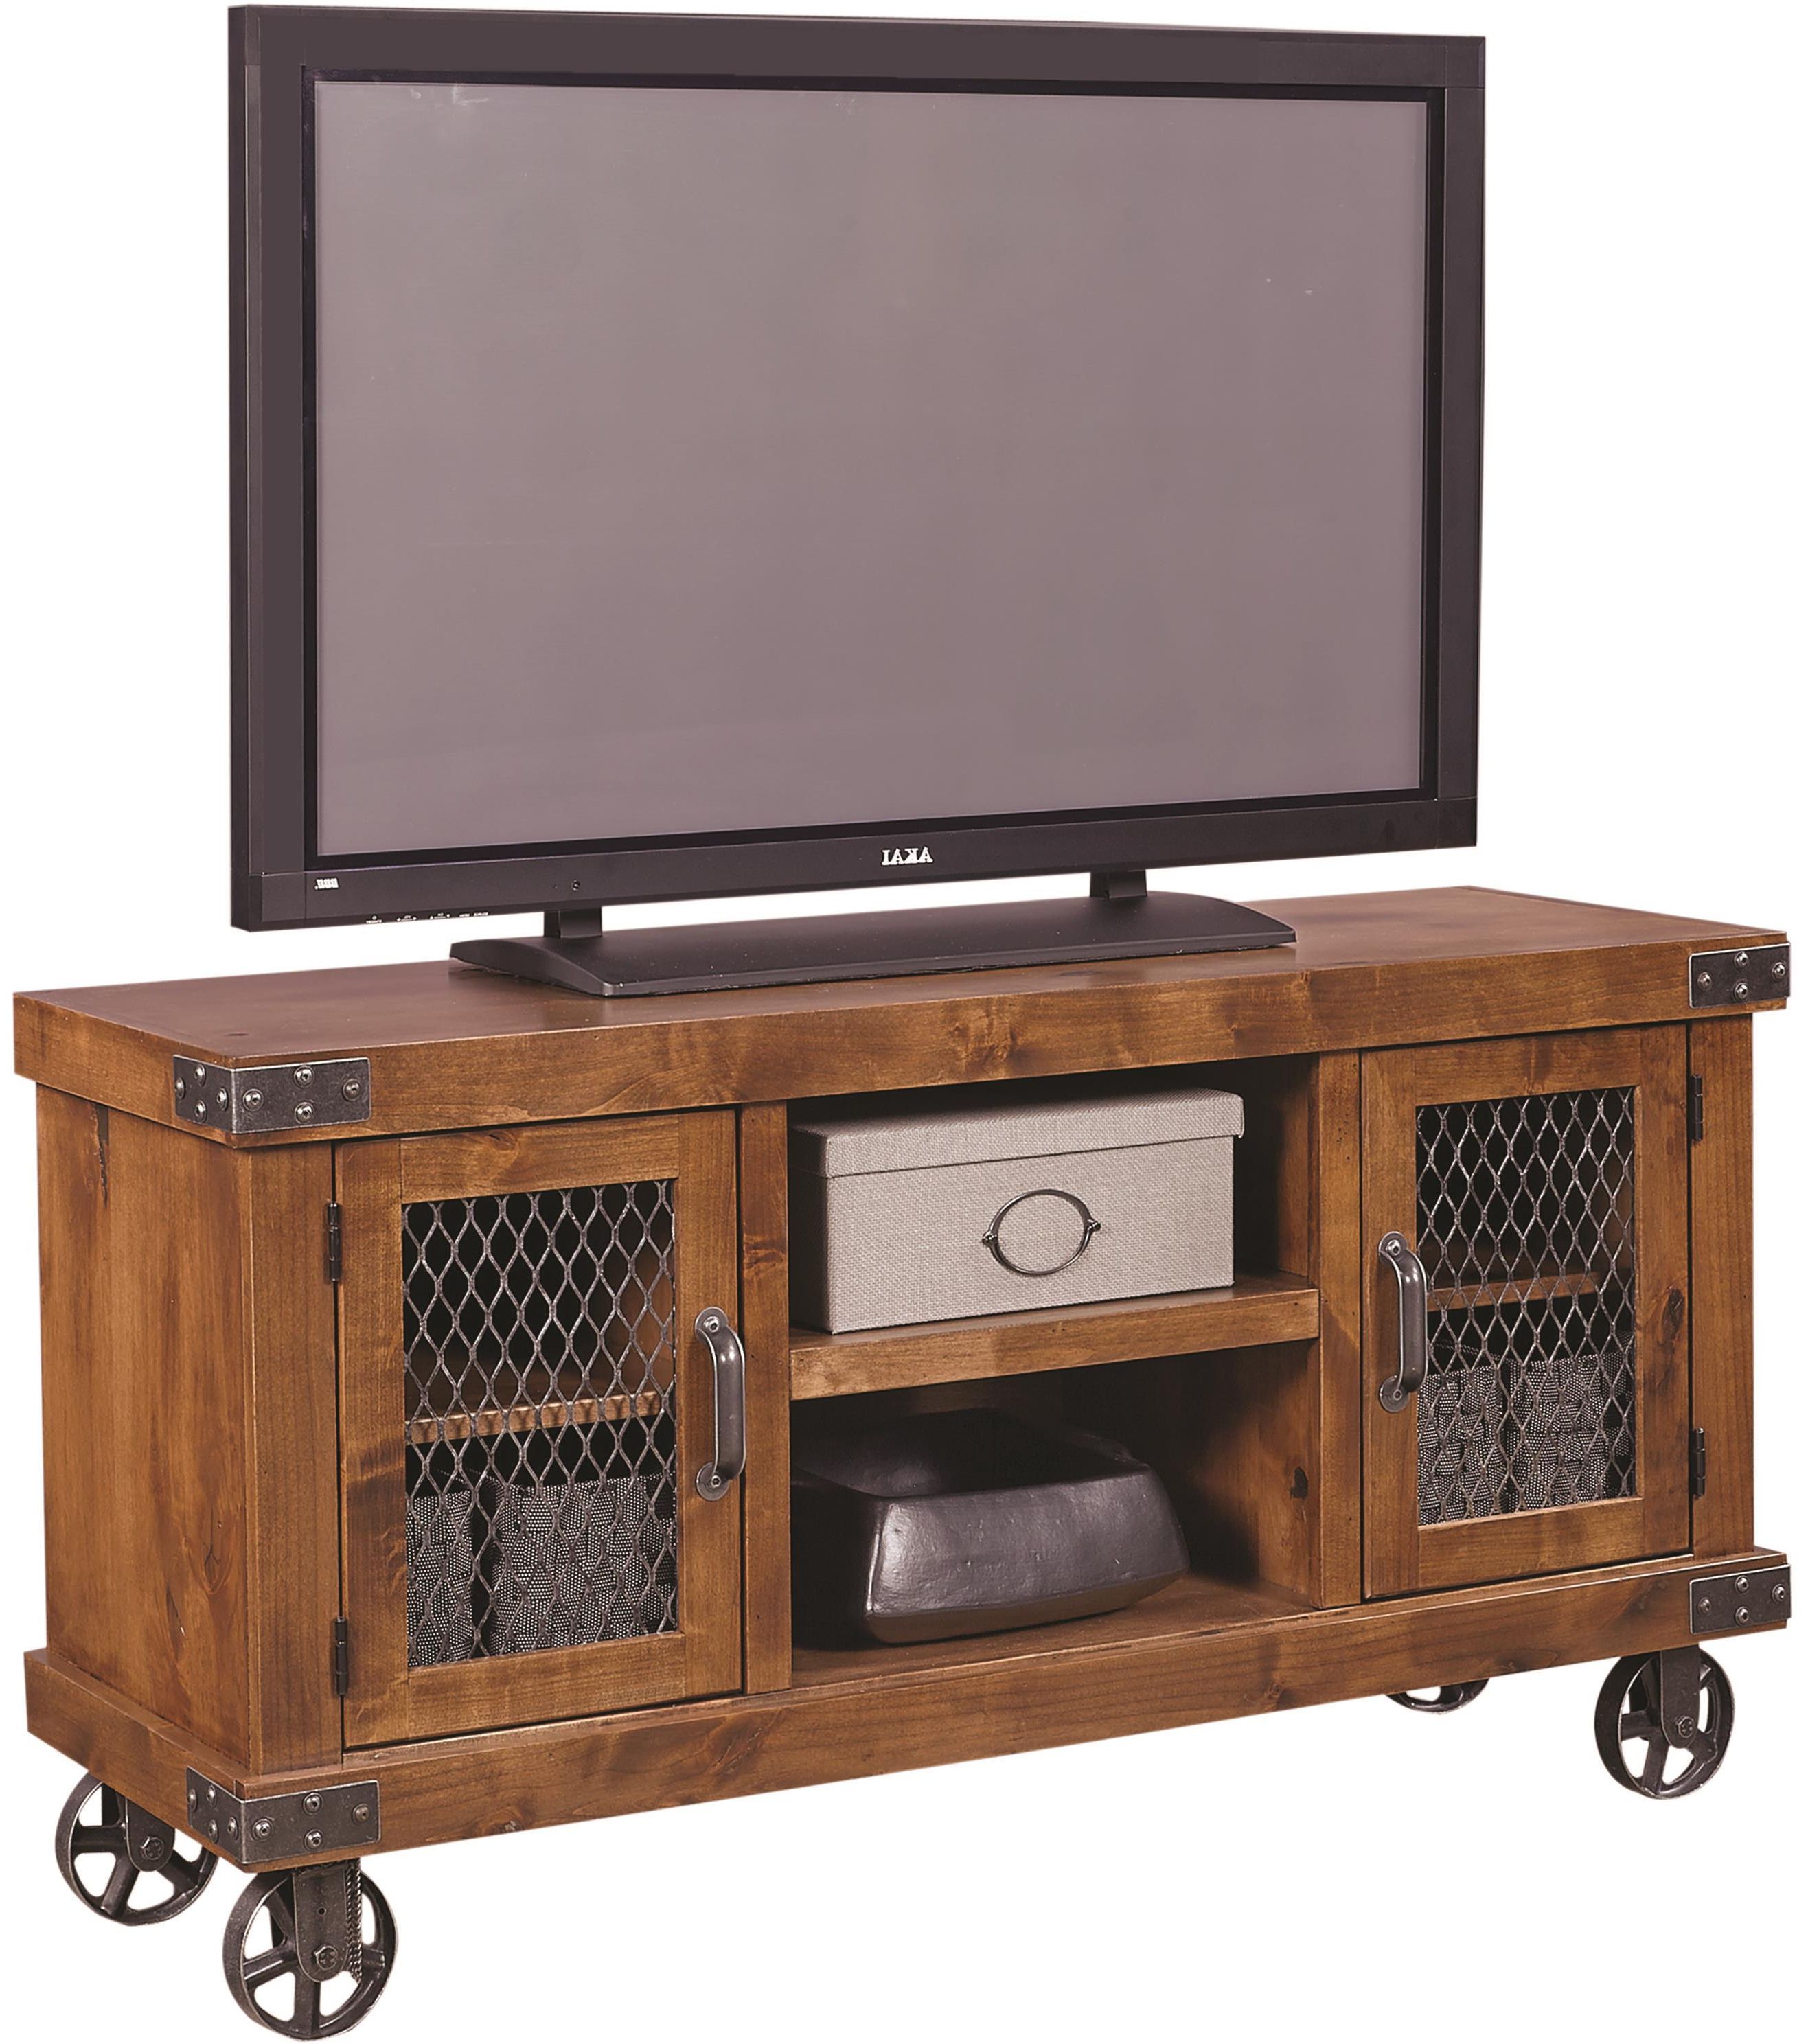 Rustic Corner Tv Stand Canada With Barn Doors Plus White Together Uk For Famous Rustic Corner Tv Stands (View 14 of 20)